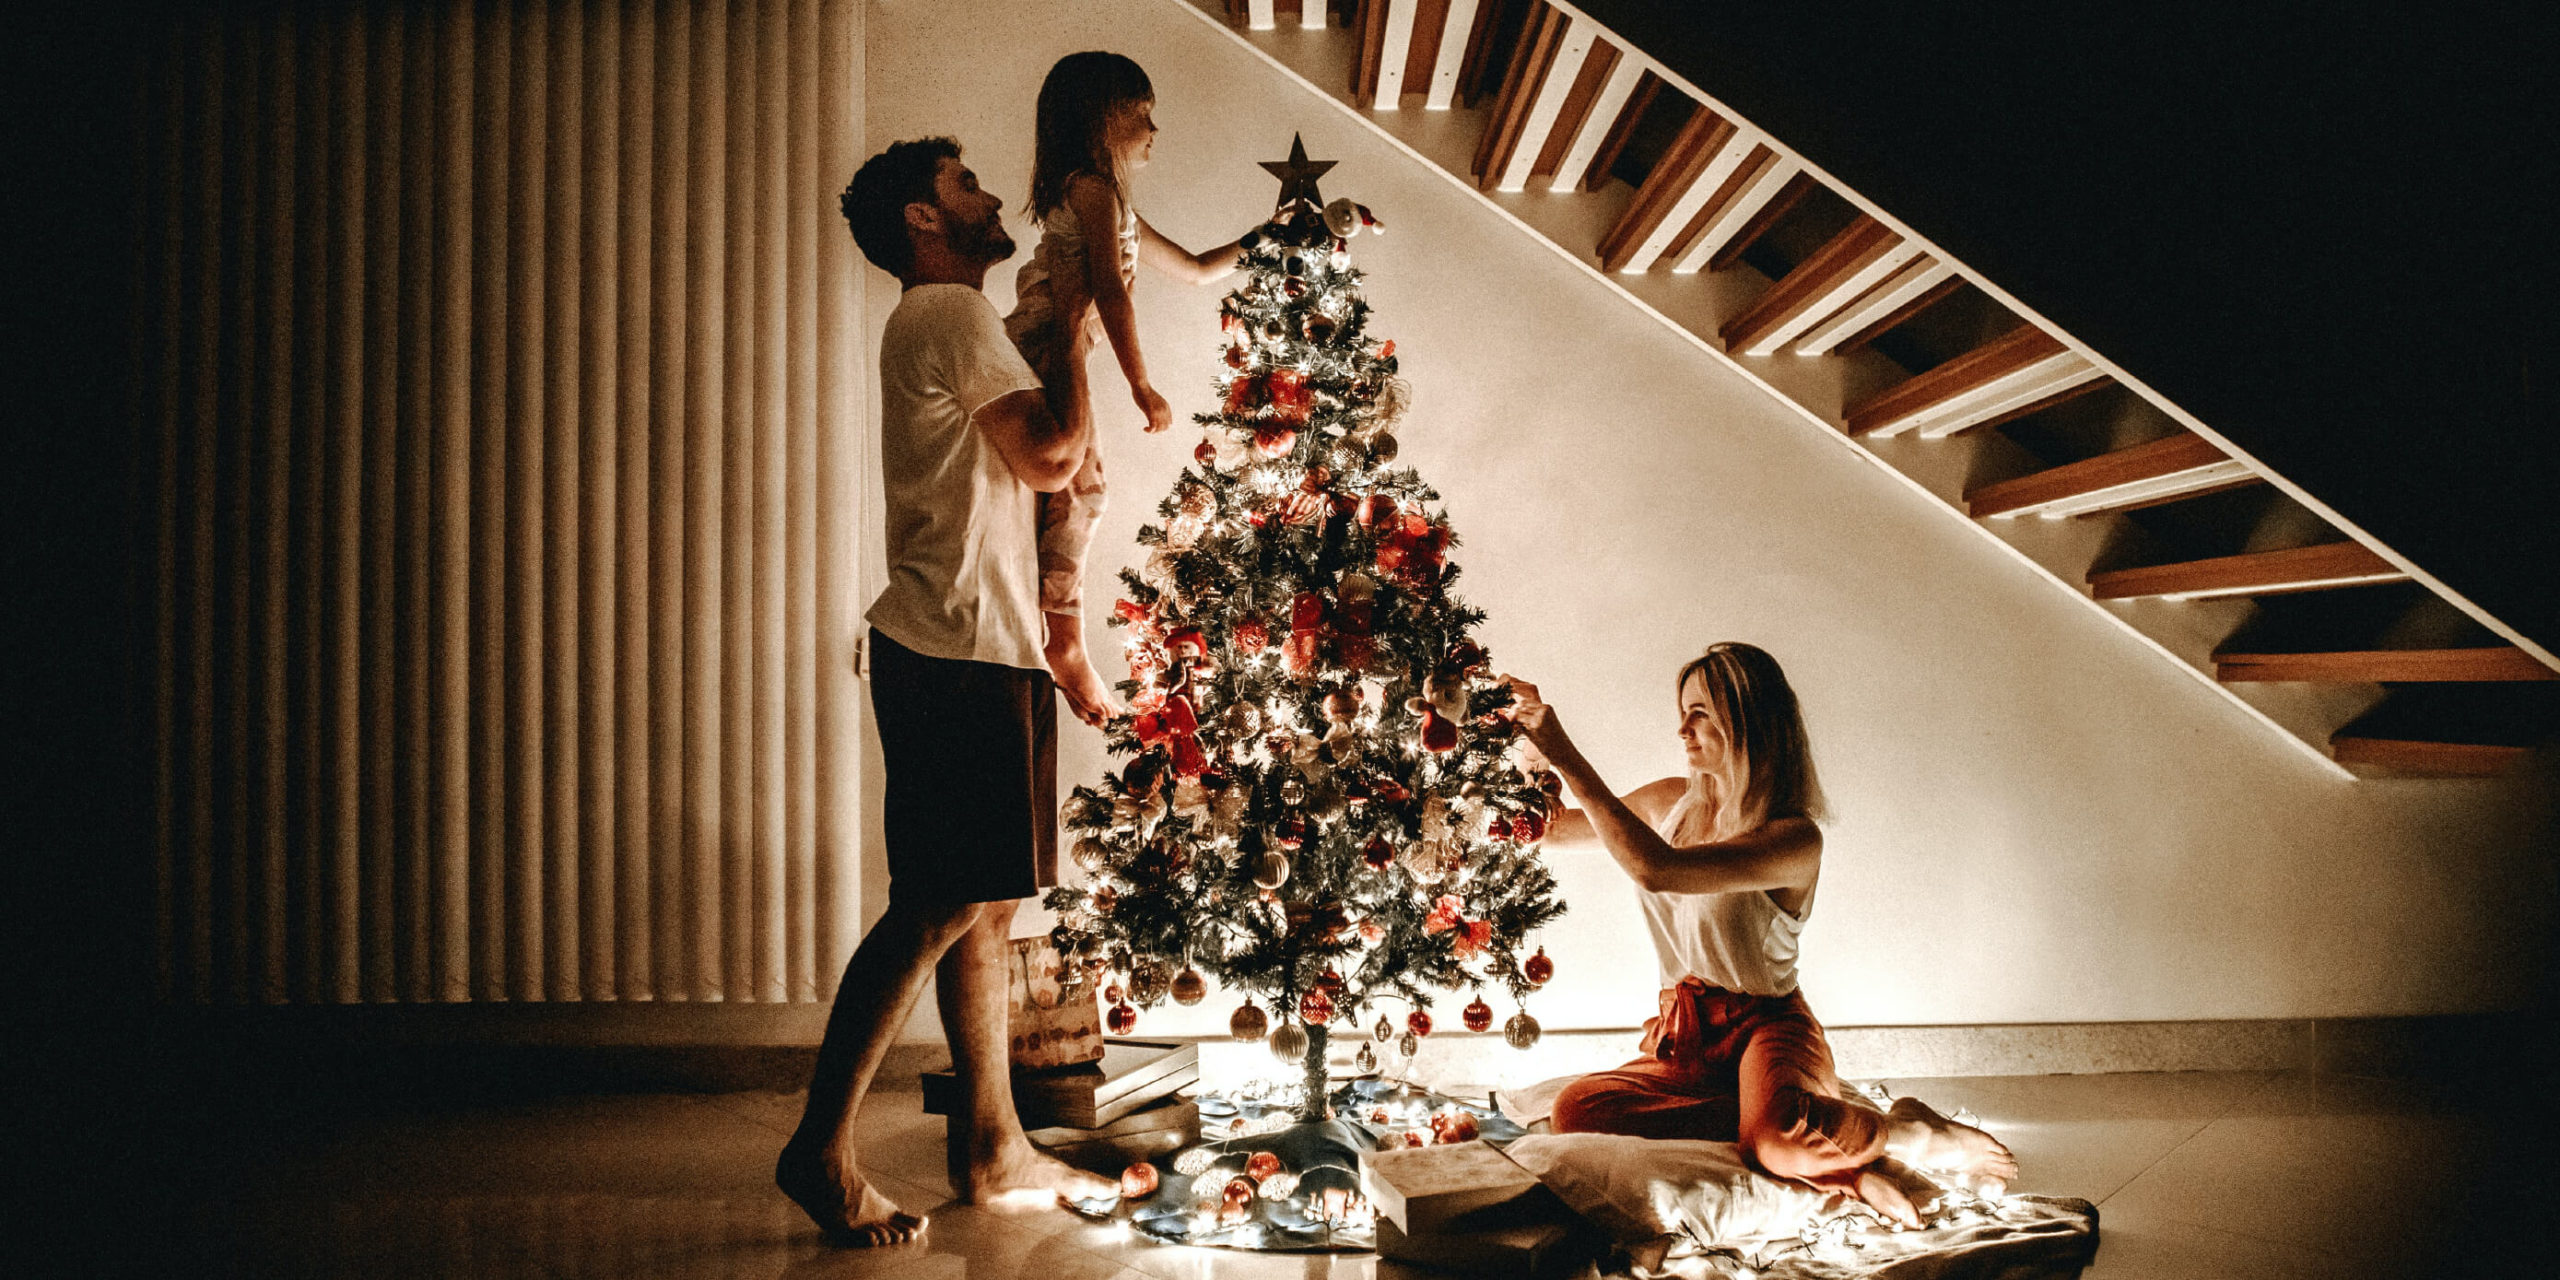 Parents and child having a stress-free holiday at home atound a Christmas tree.